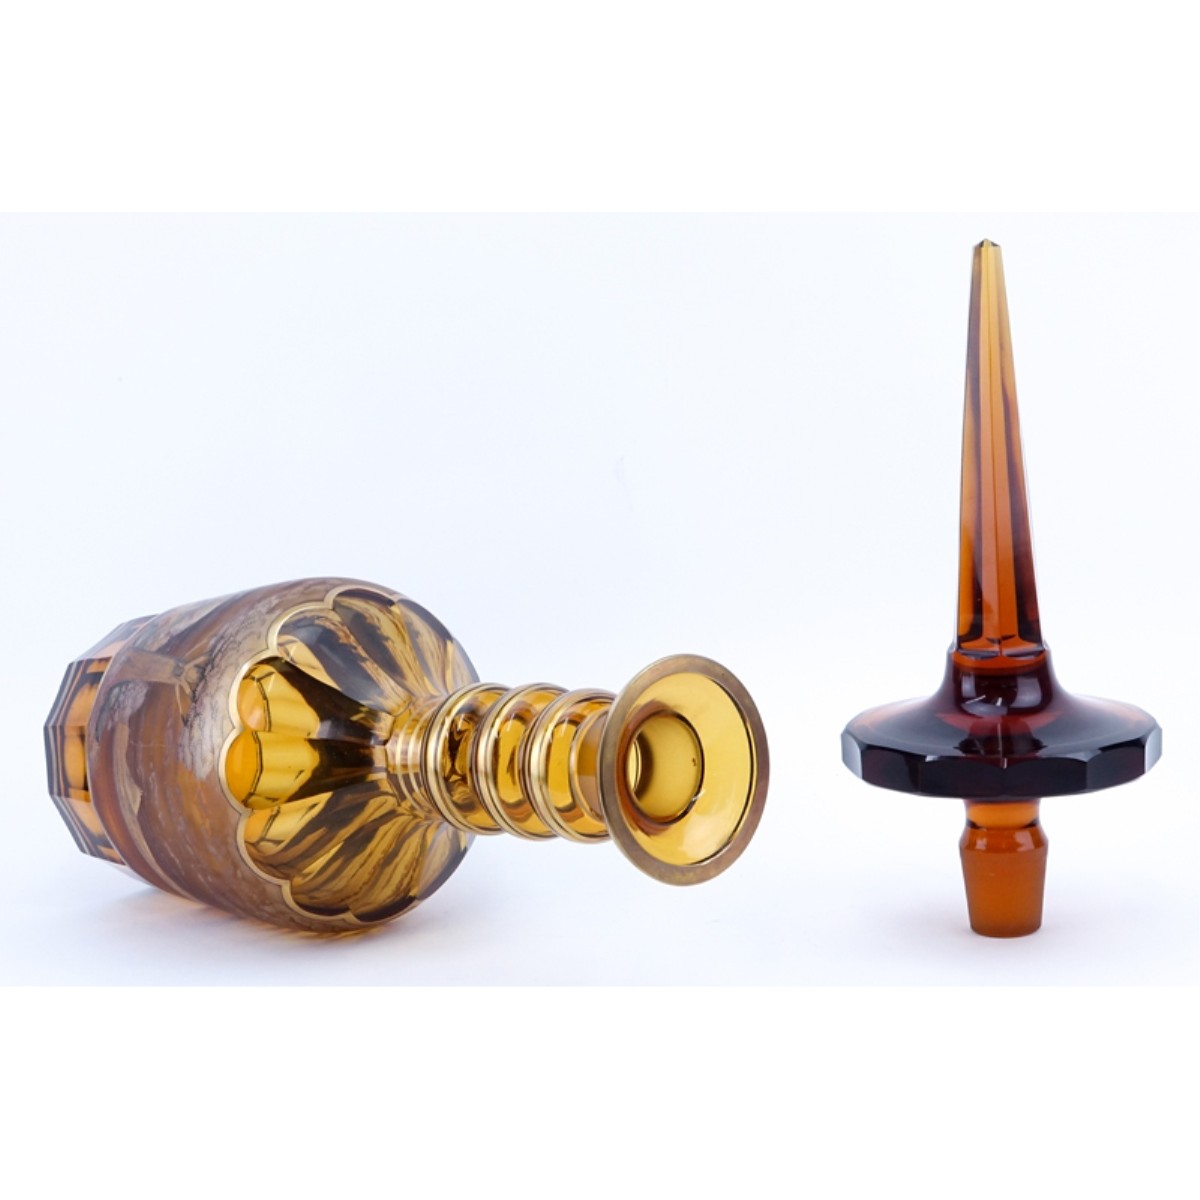 Oversized Bohemian Amber and Gilt Decanter